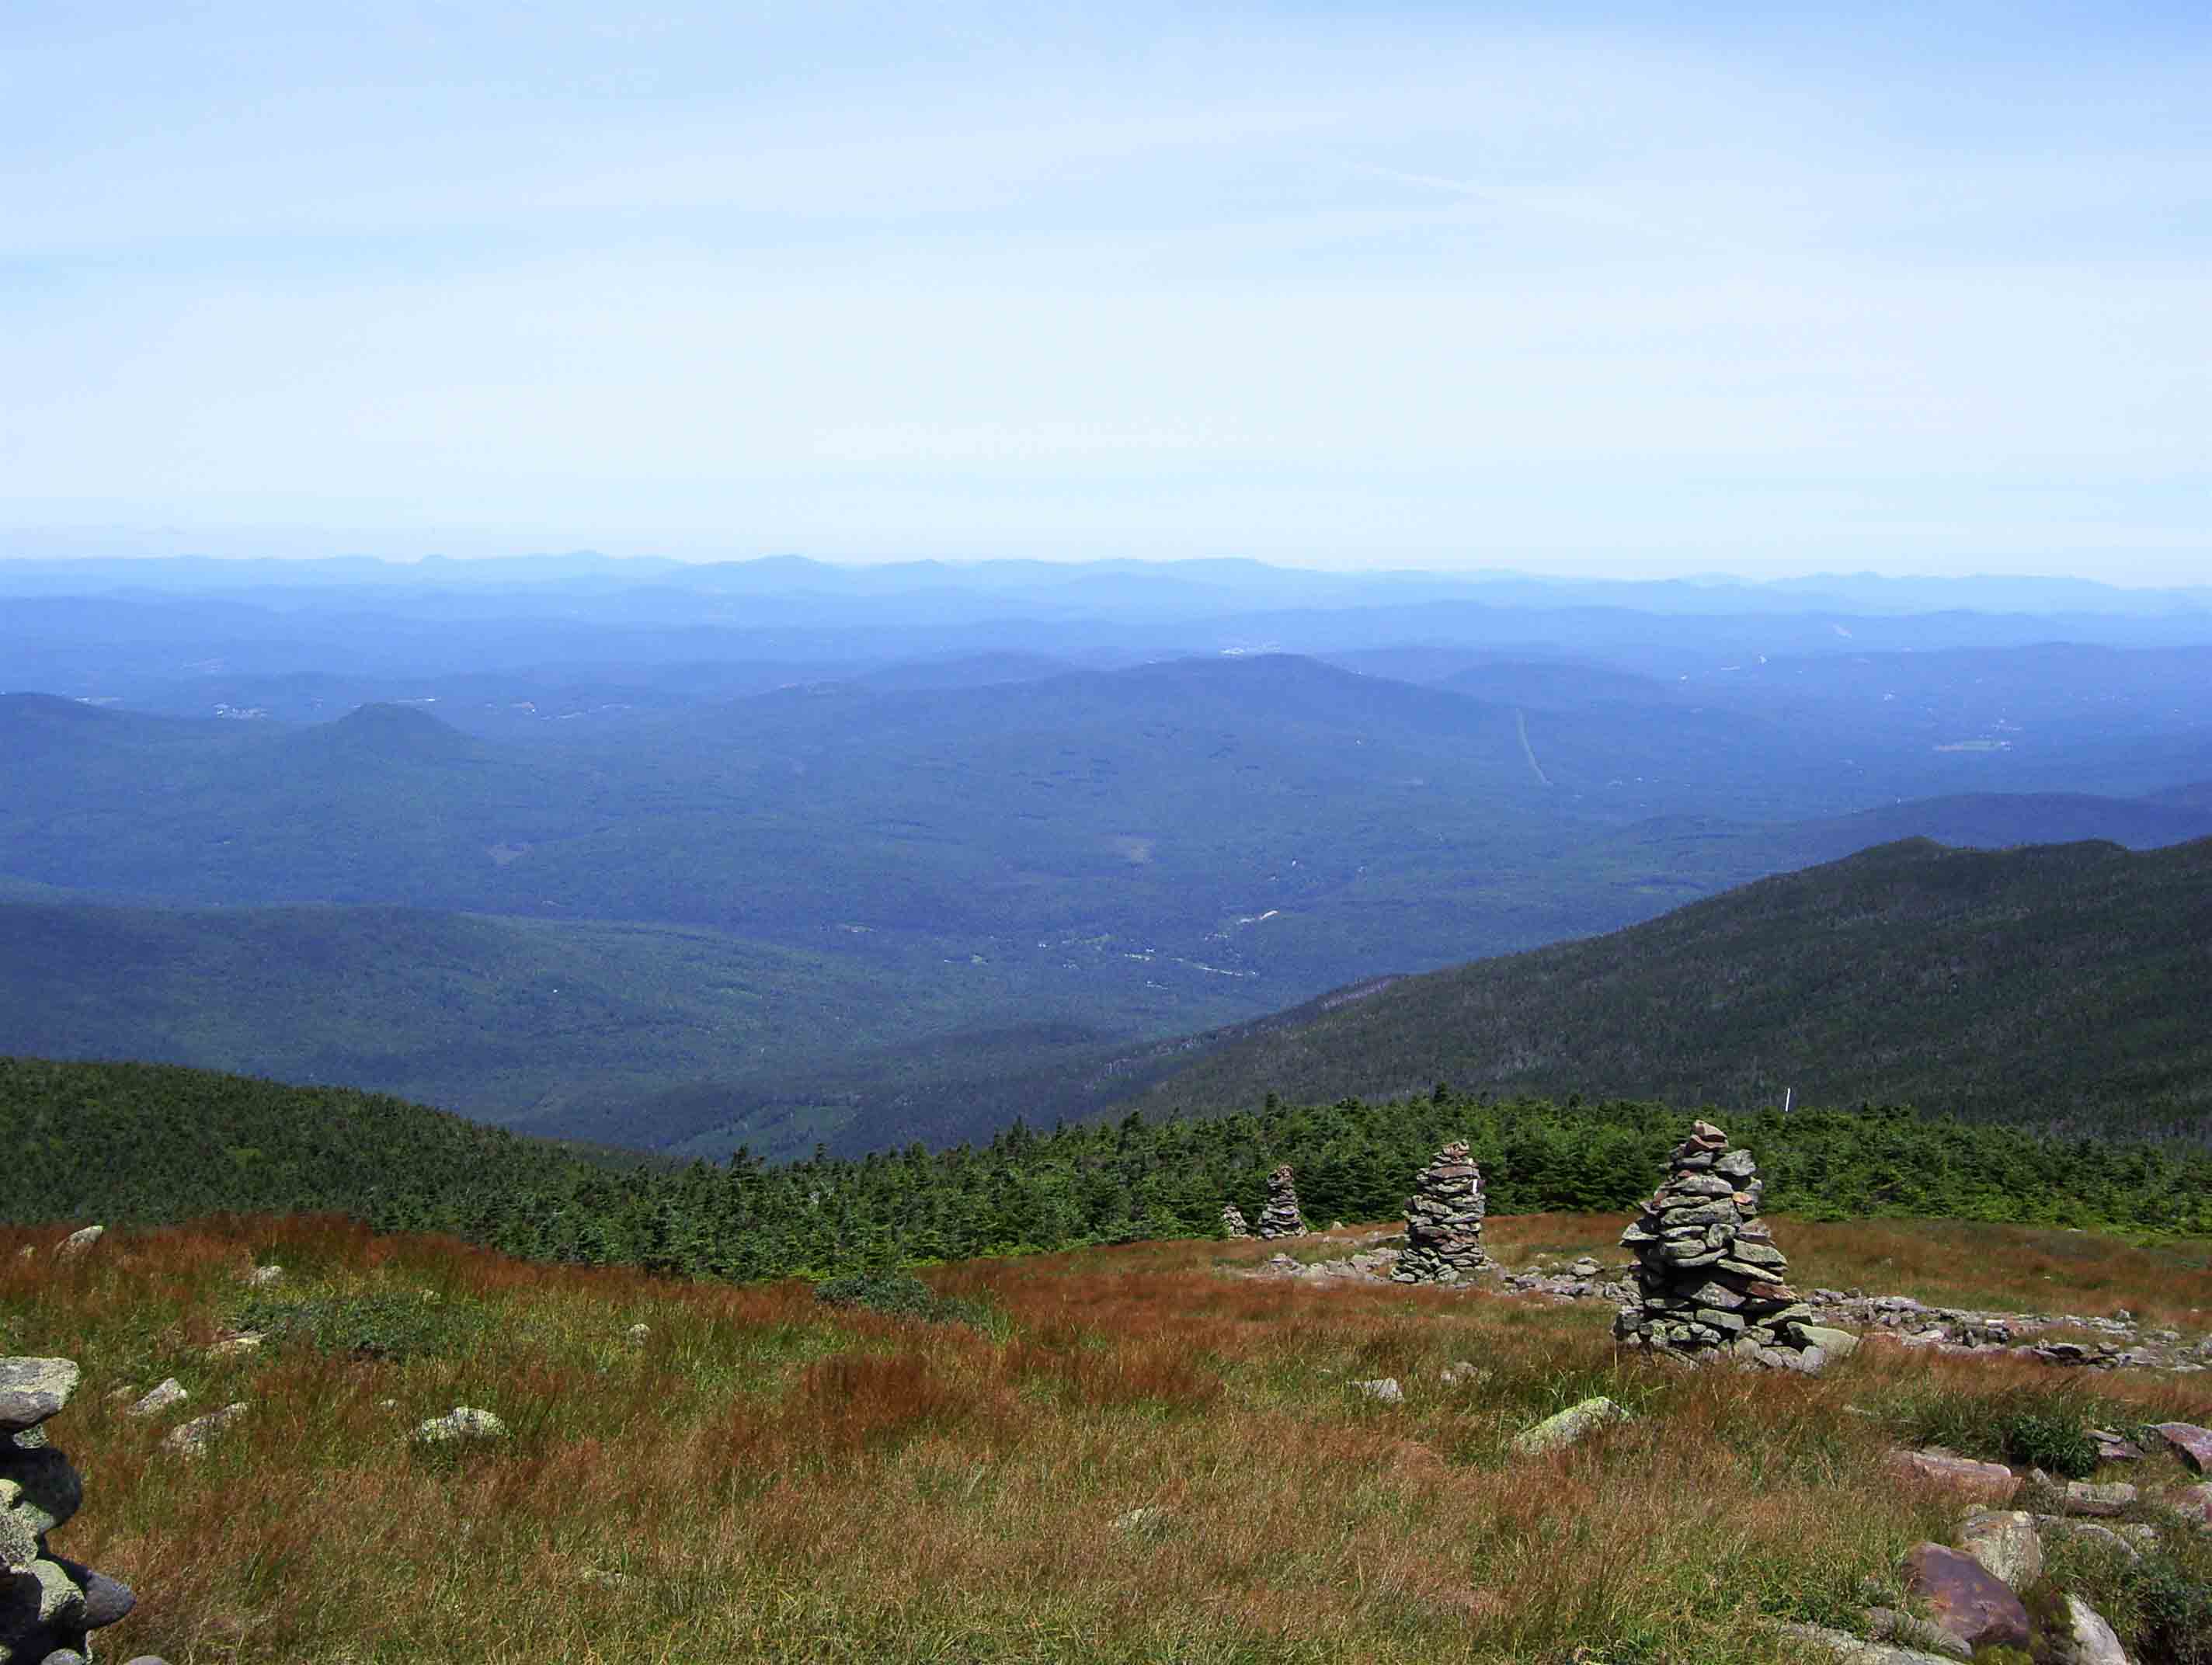 mm 3.8 - View to the north from near the summit of Mt. Moosilauke.  Courtesy dlcul@conncoll.edu